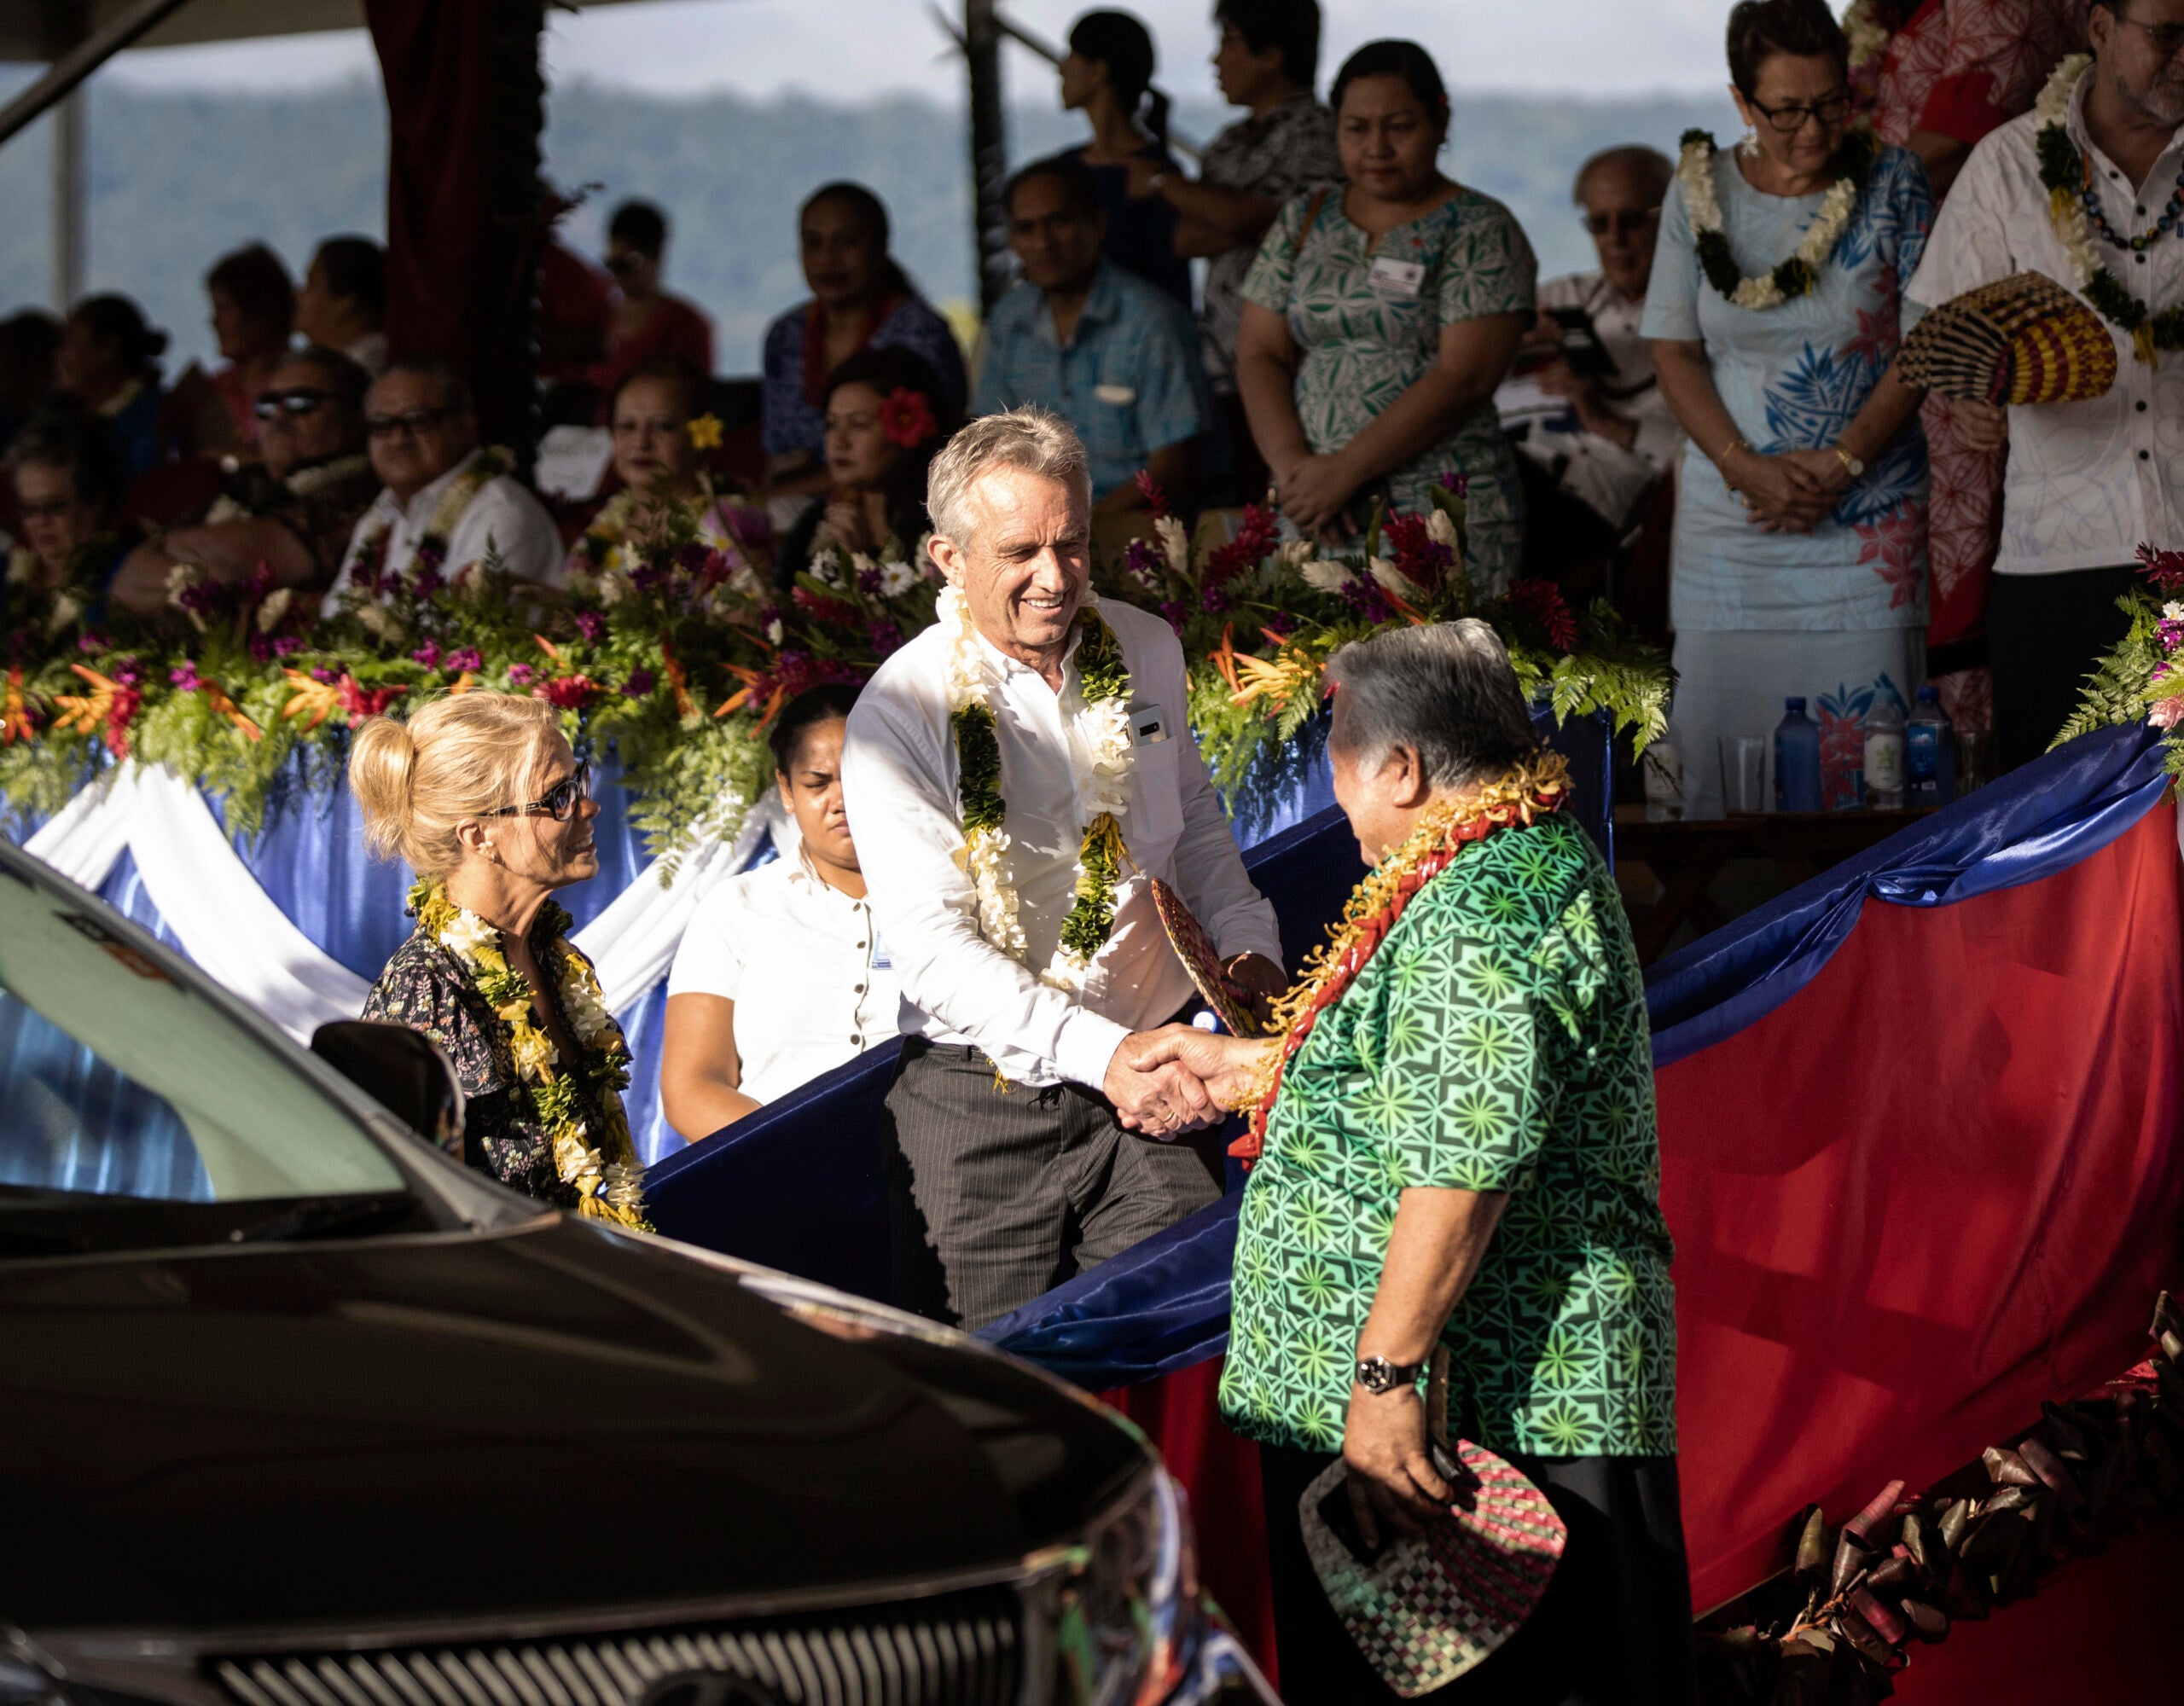 Prime Minister Tuilaepa Sailele Malielegaoi, foreground right, shakes hands with Robert F. Kennedy Jr.